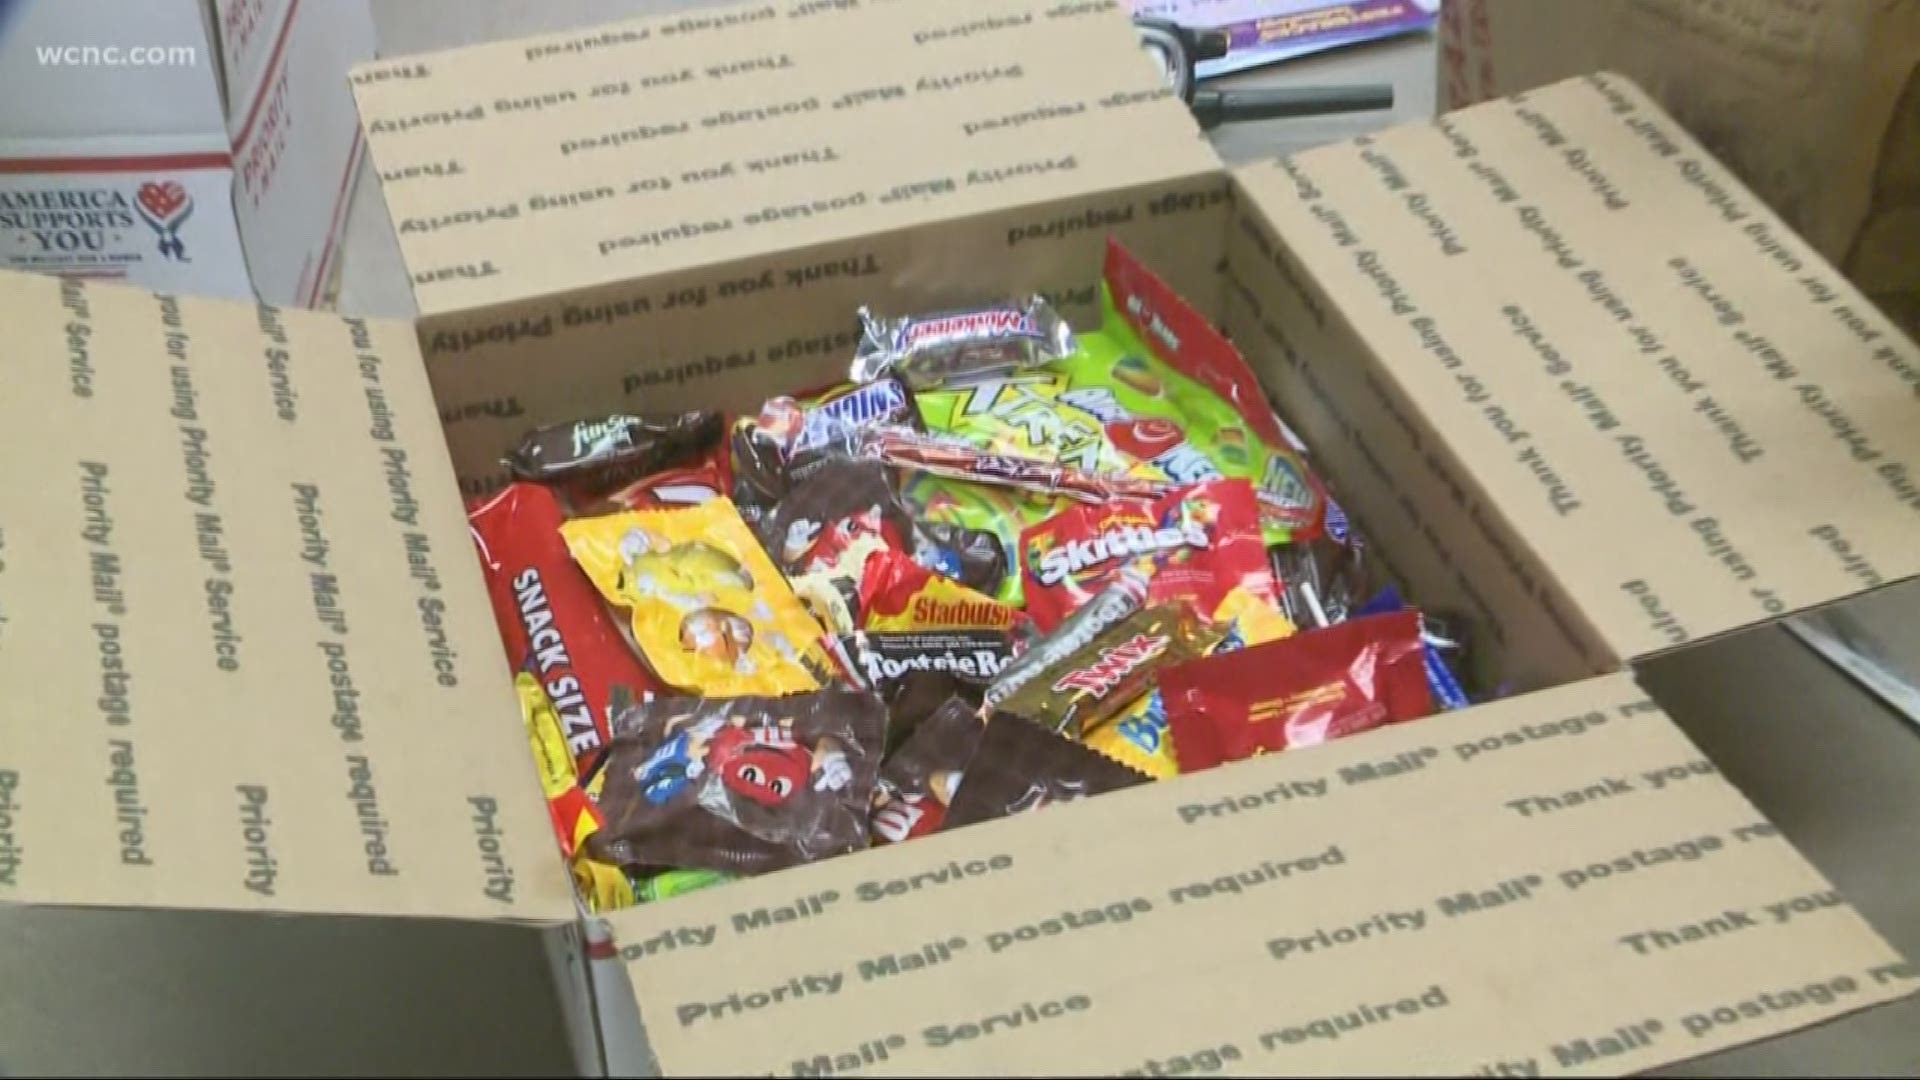 Do you have a ton of leftover Halloween candy? Instead of eating or throwing it out, why not donate it?